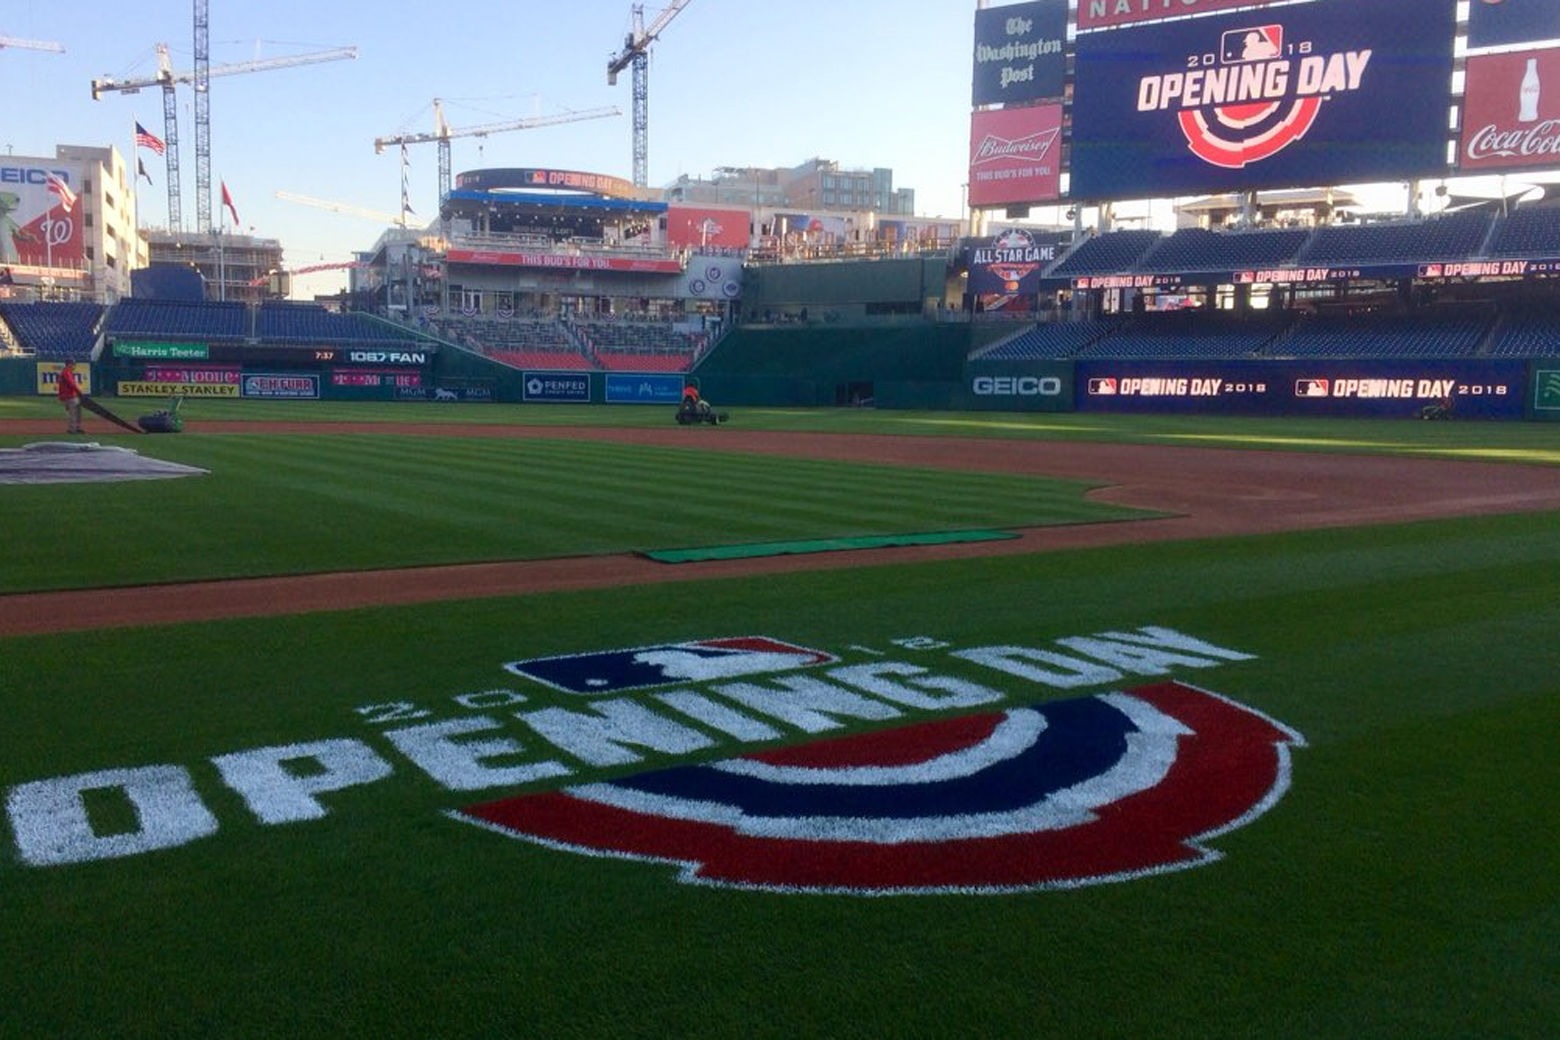 Workers prepare the field at Nationals Park Thursday ahead of the home opener. (WTOP/Nick Iannelli)